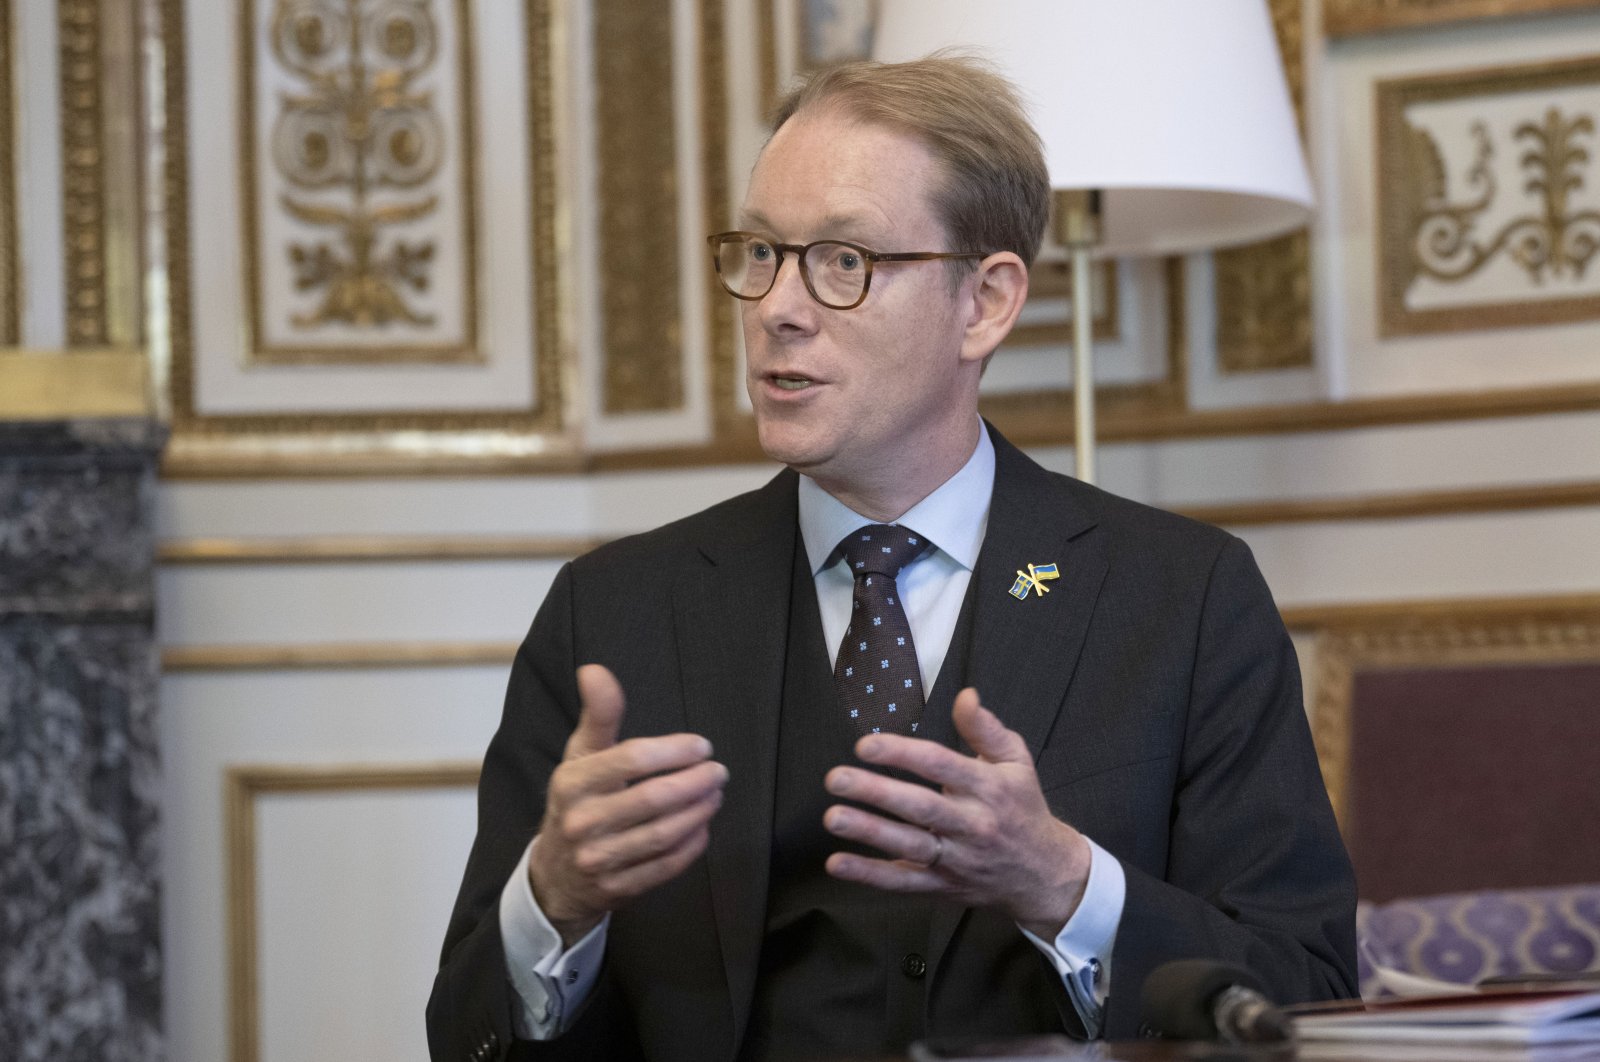 Swedish Foreign Minister Tobias Billström speaks during an interview with the Associated Press at the Ministry of Foreign Affairs in Stockholm, Sweden, Monday, Oct. 24, 2022. (AP Photo)